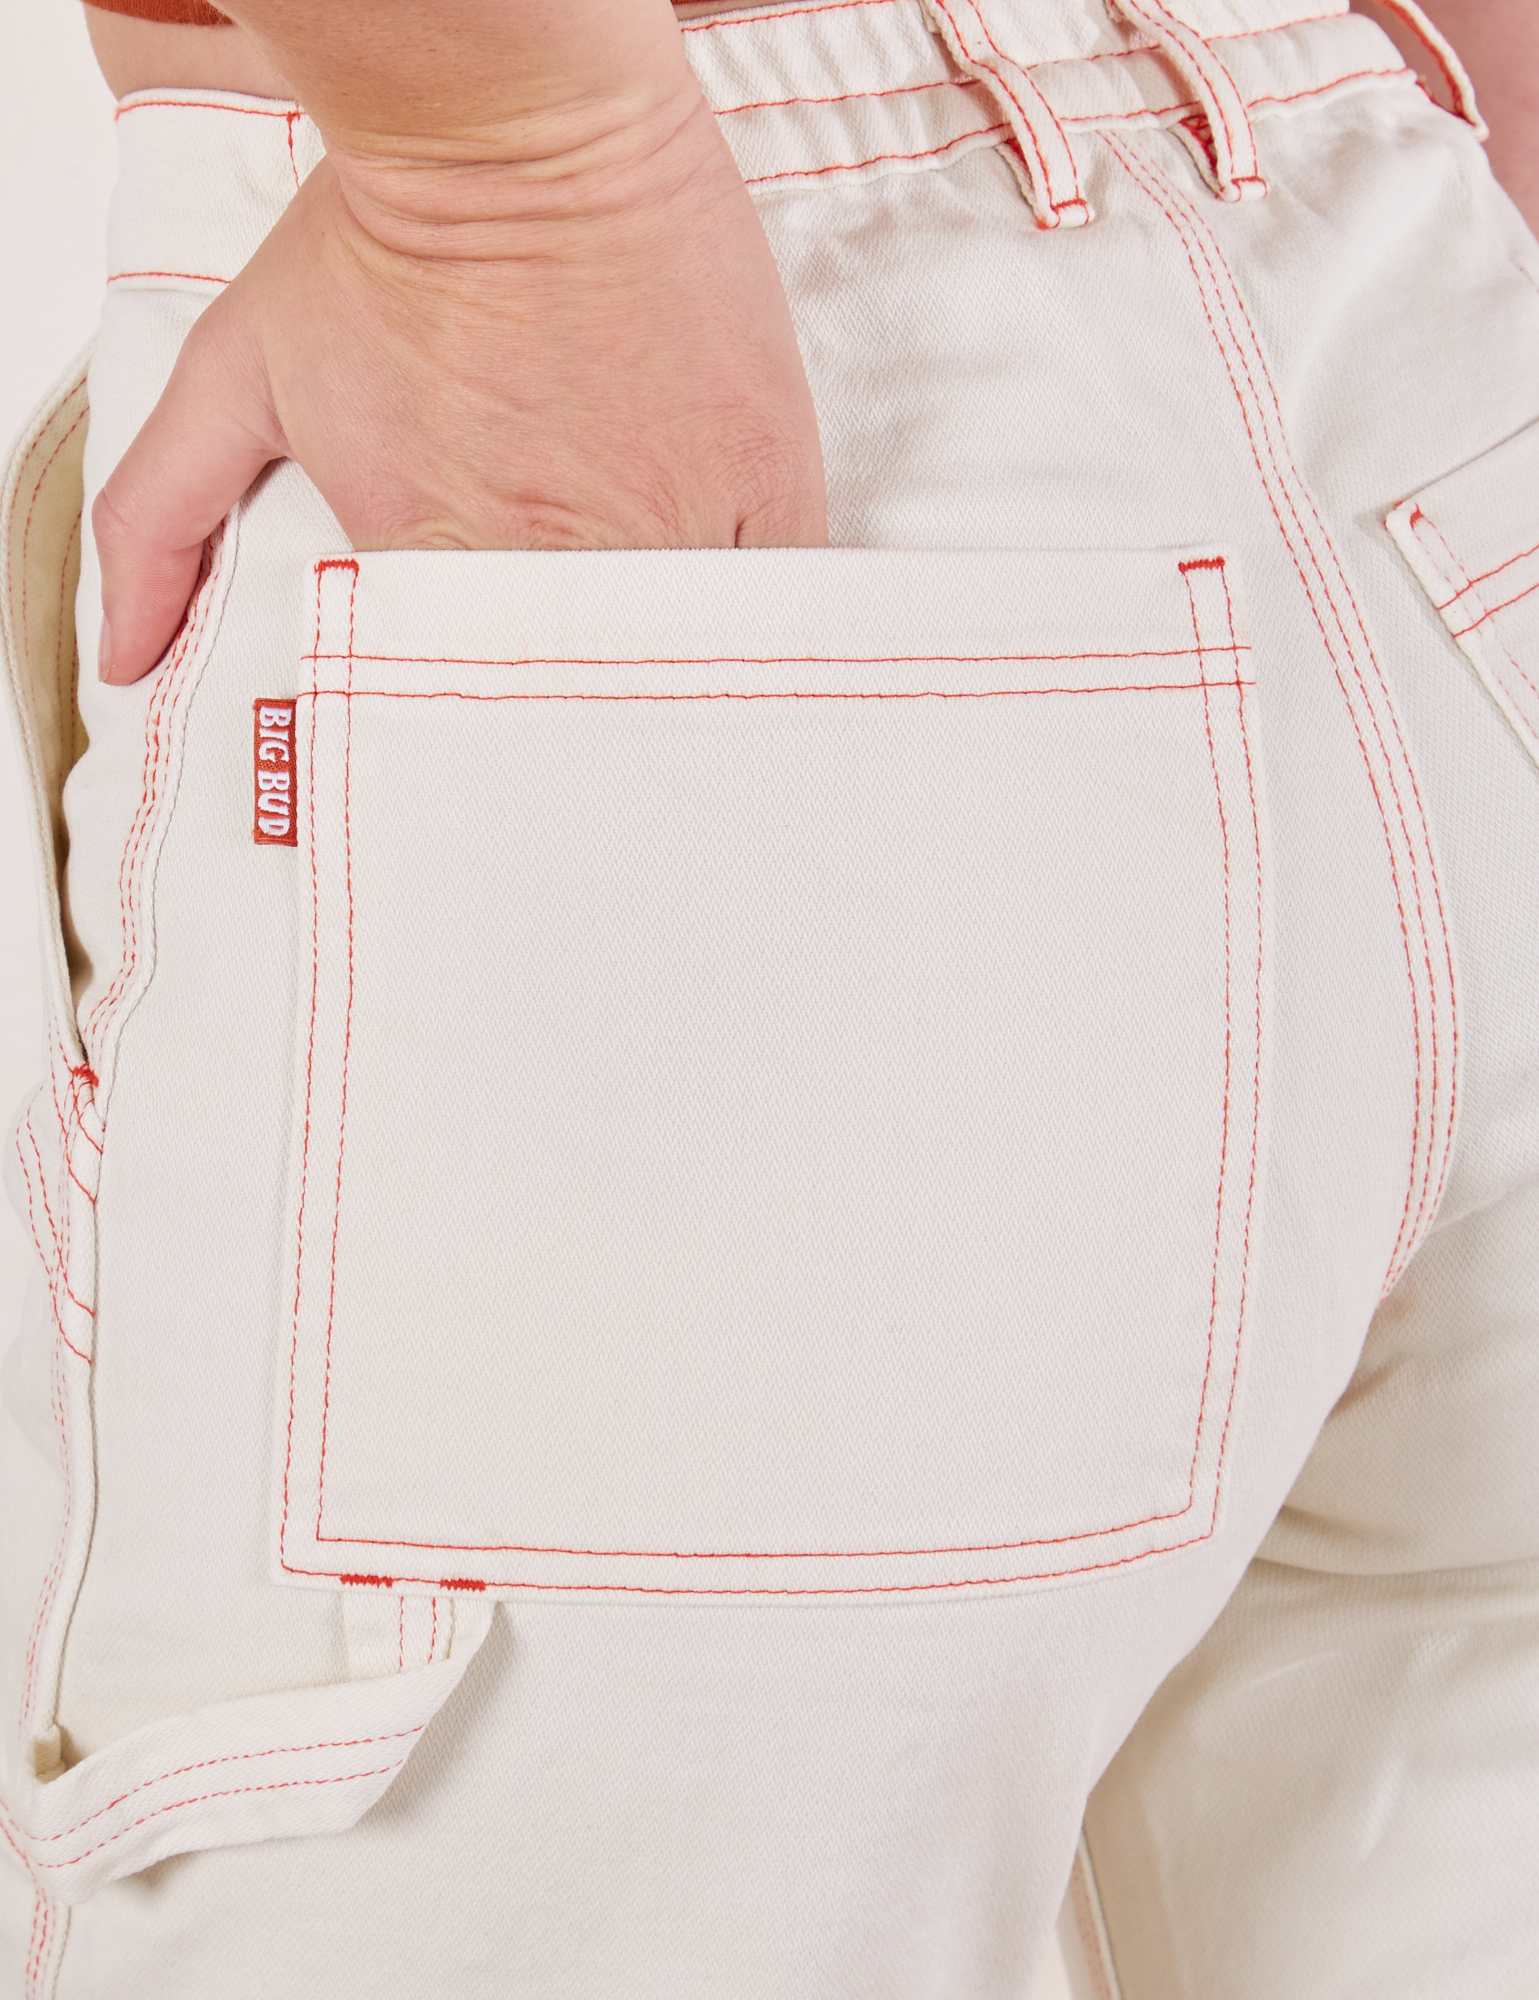 Carpenter Jeans in Vintage Tee Off-White back pocket close up. Alex has her hand in the pocket.